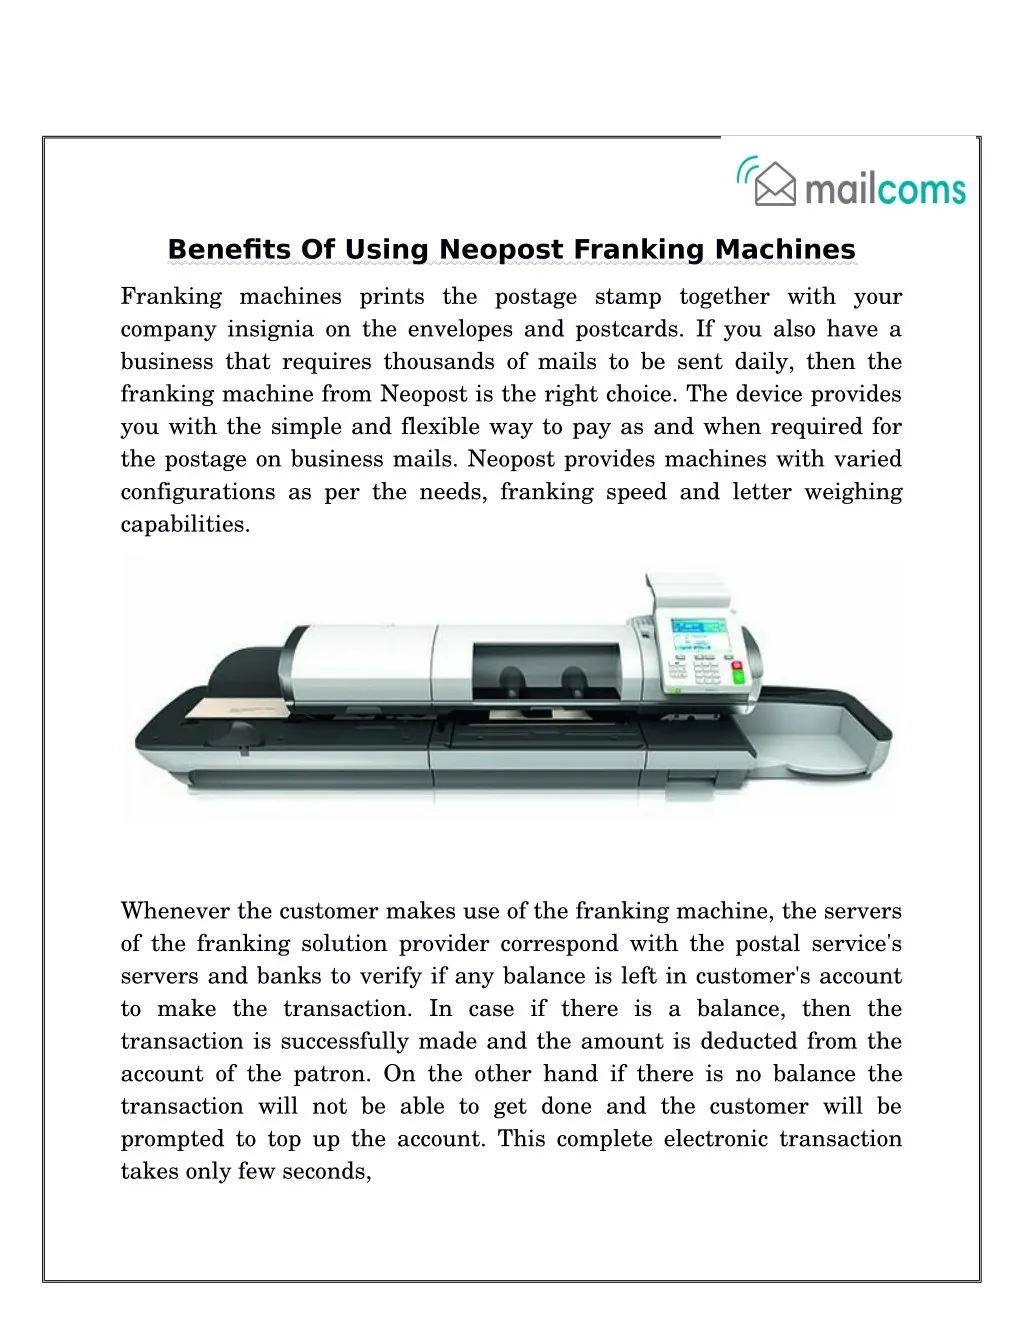 benefits of using neopost franking machines